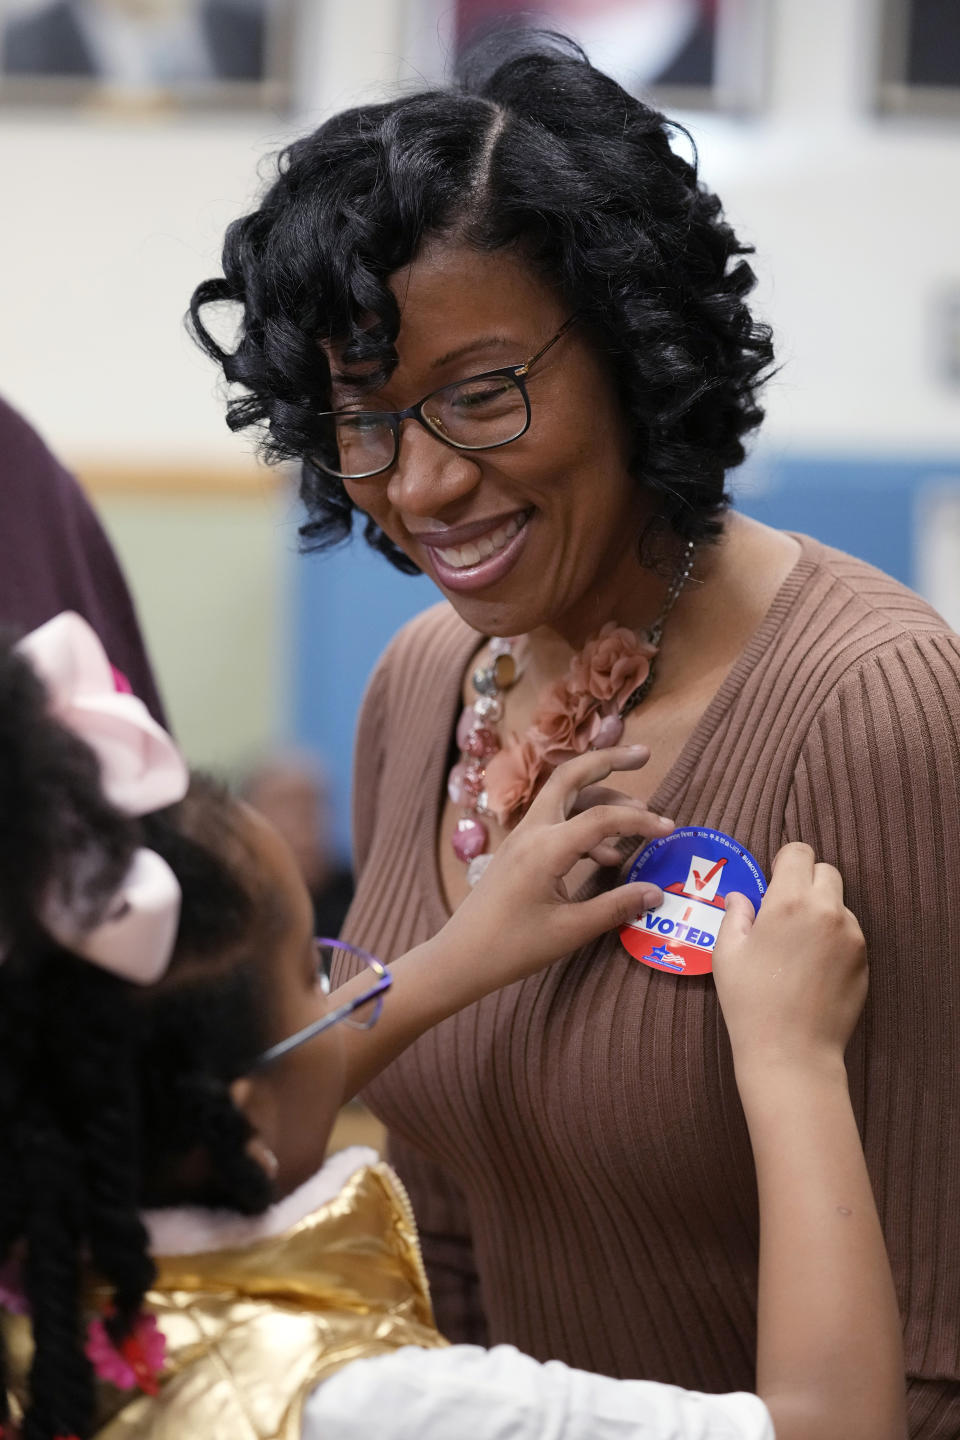 Chicago Treasurer Melissa Conyears-Ervin who runs for Congress in the 7th District, gets a "I voted" sticker from her daughter Jeneva after voting at Marshall Metro high school in Chicago, Tuesday, March 19, 2024. Illinois residents will vote Tuesday to narrow Democratic and GOP candidate fields in key U.S. House races. (AP Photo/Nam Y. Huh)